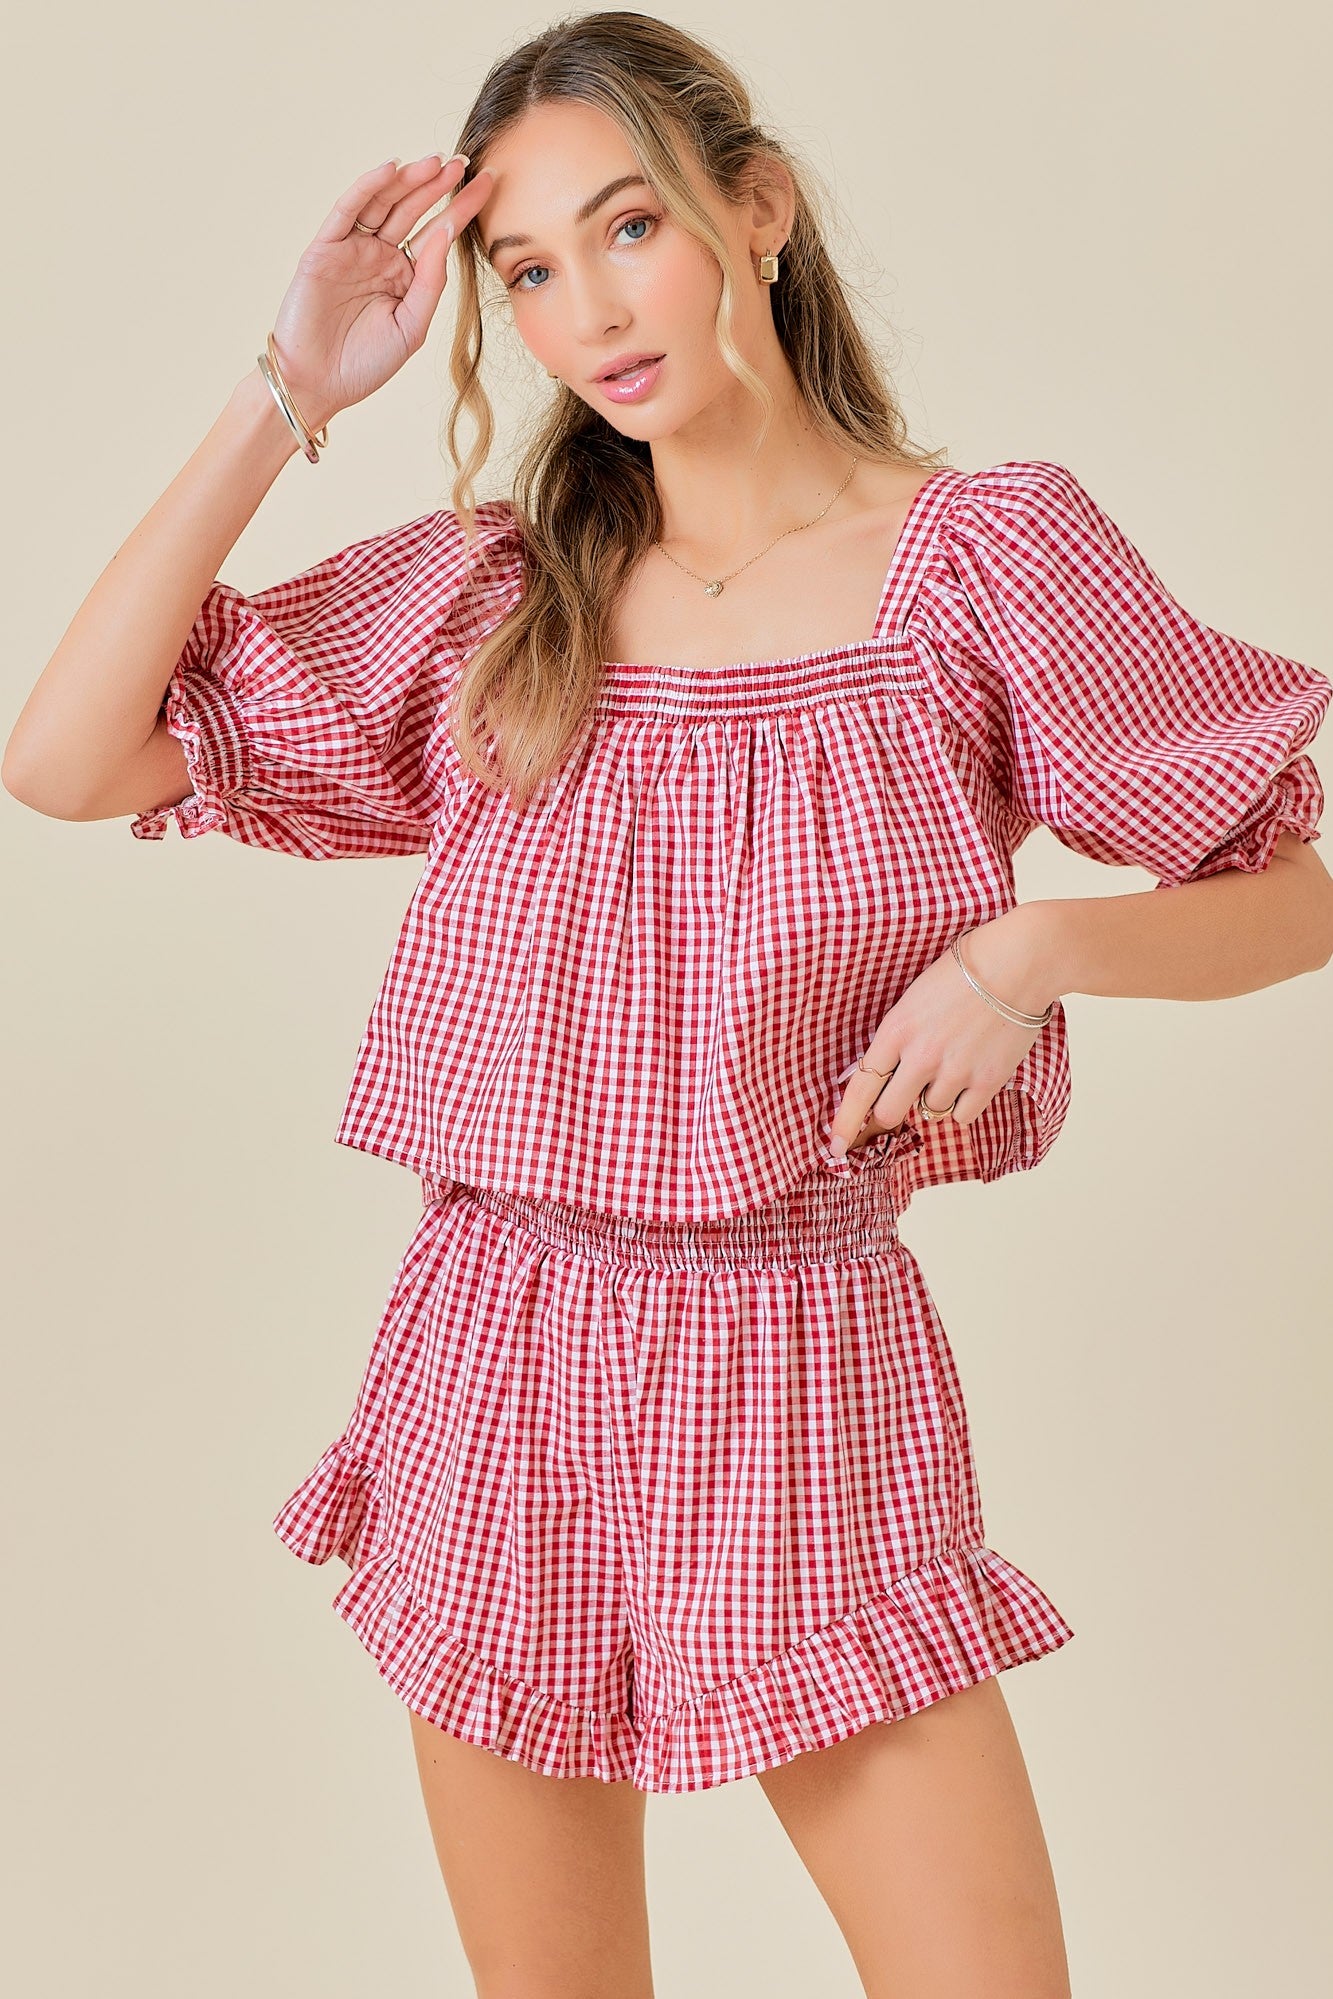 MALLIE RUFFLE DETAIL SMOCKED GINGHAM SHORTS IN RED & WHITE